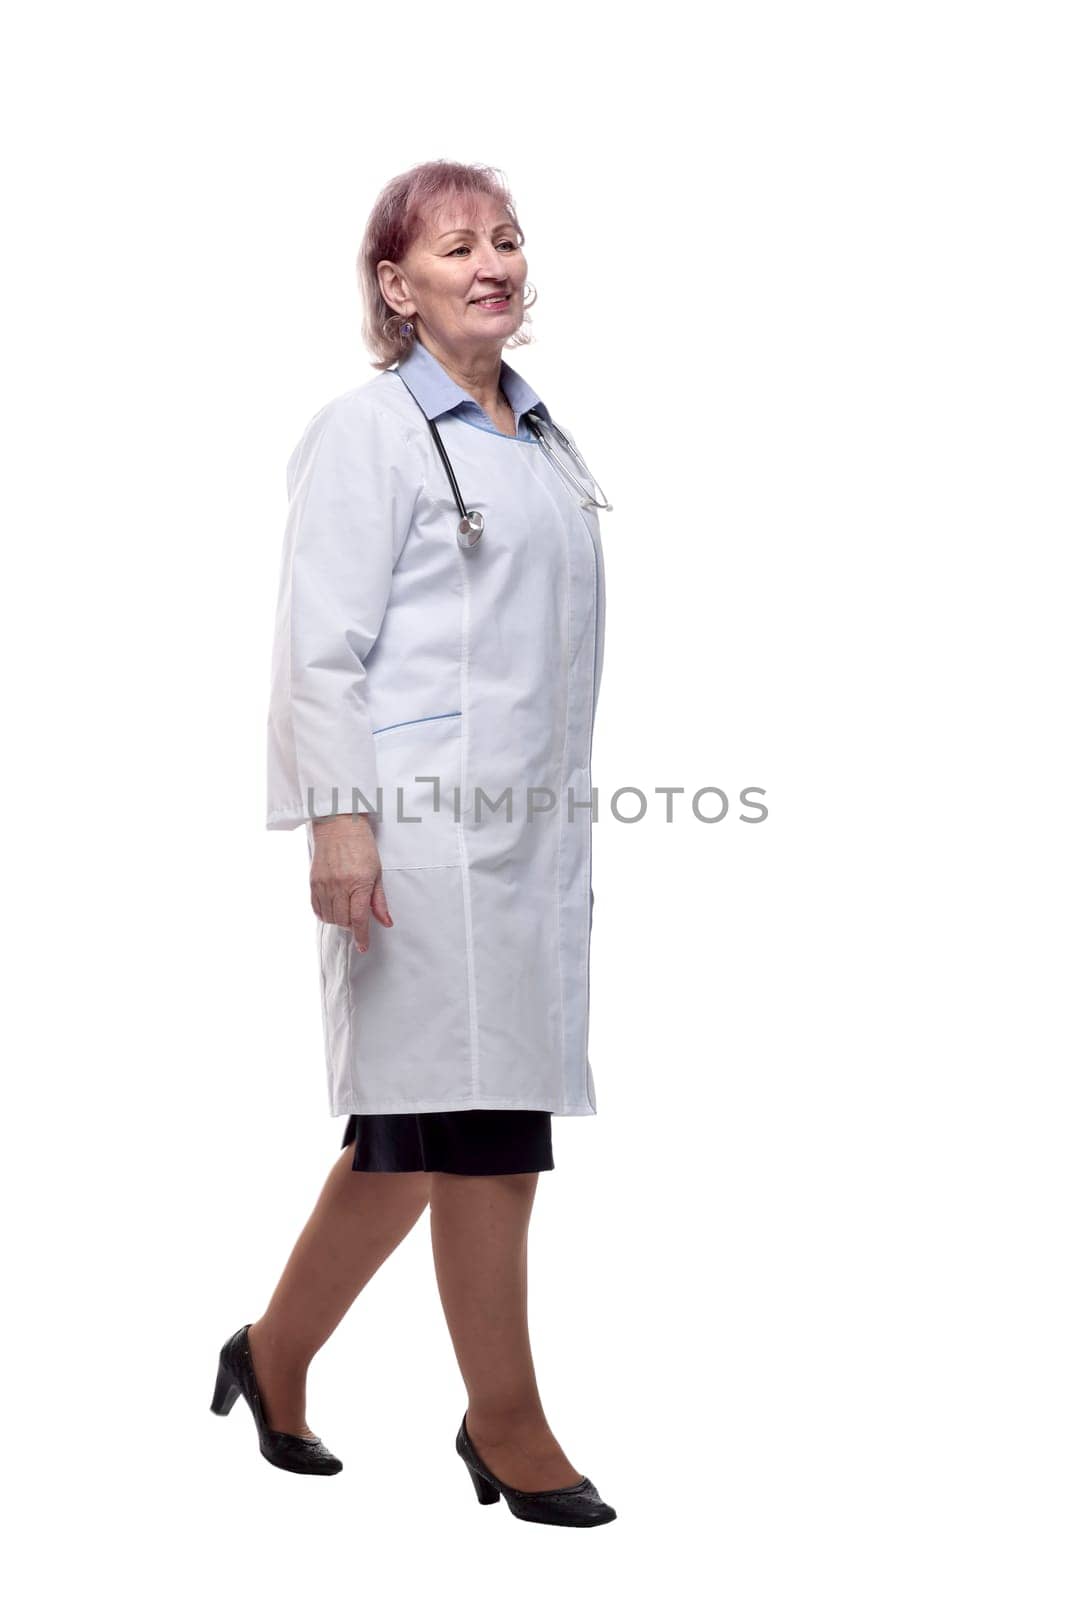 smiling woman doctor striding forward . isolated on a white by asdf